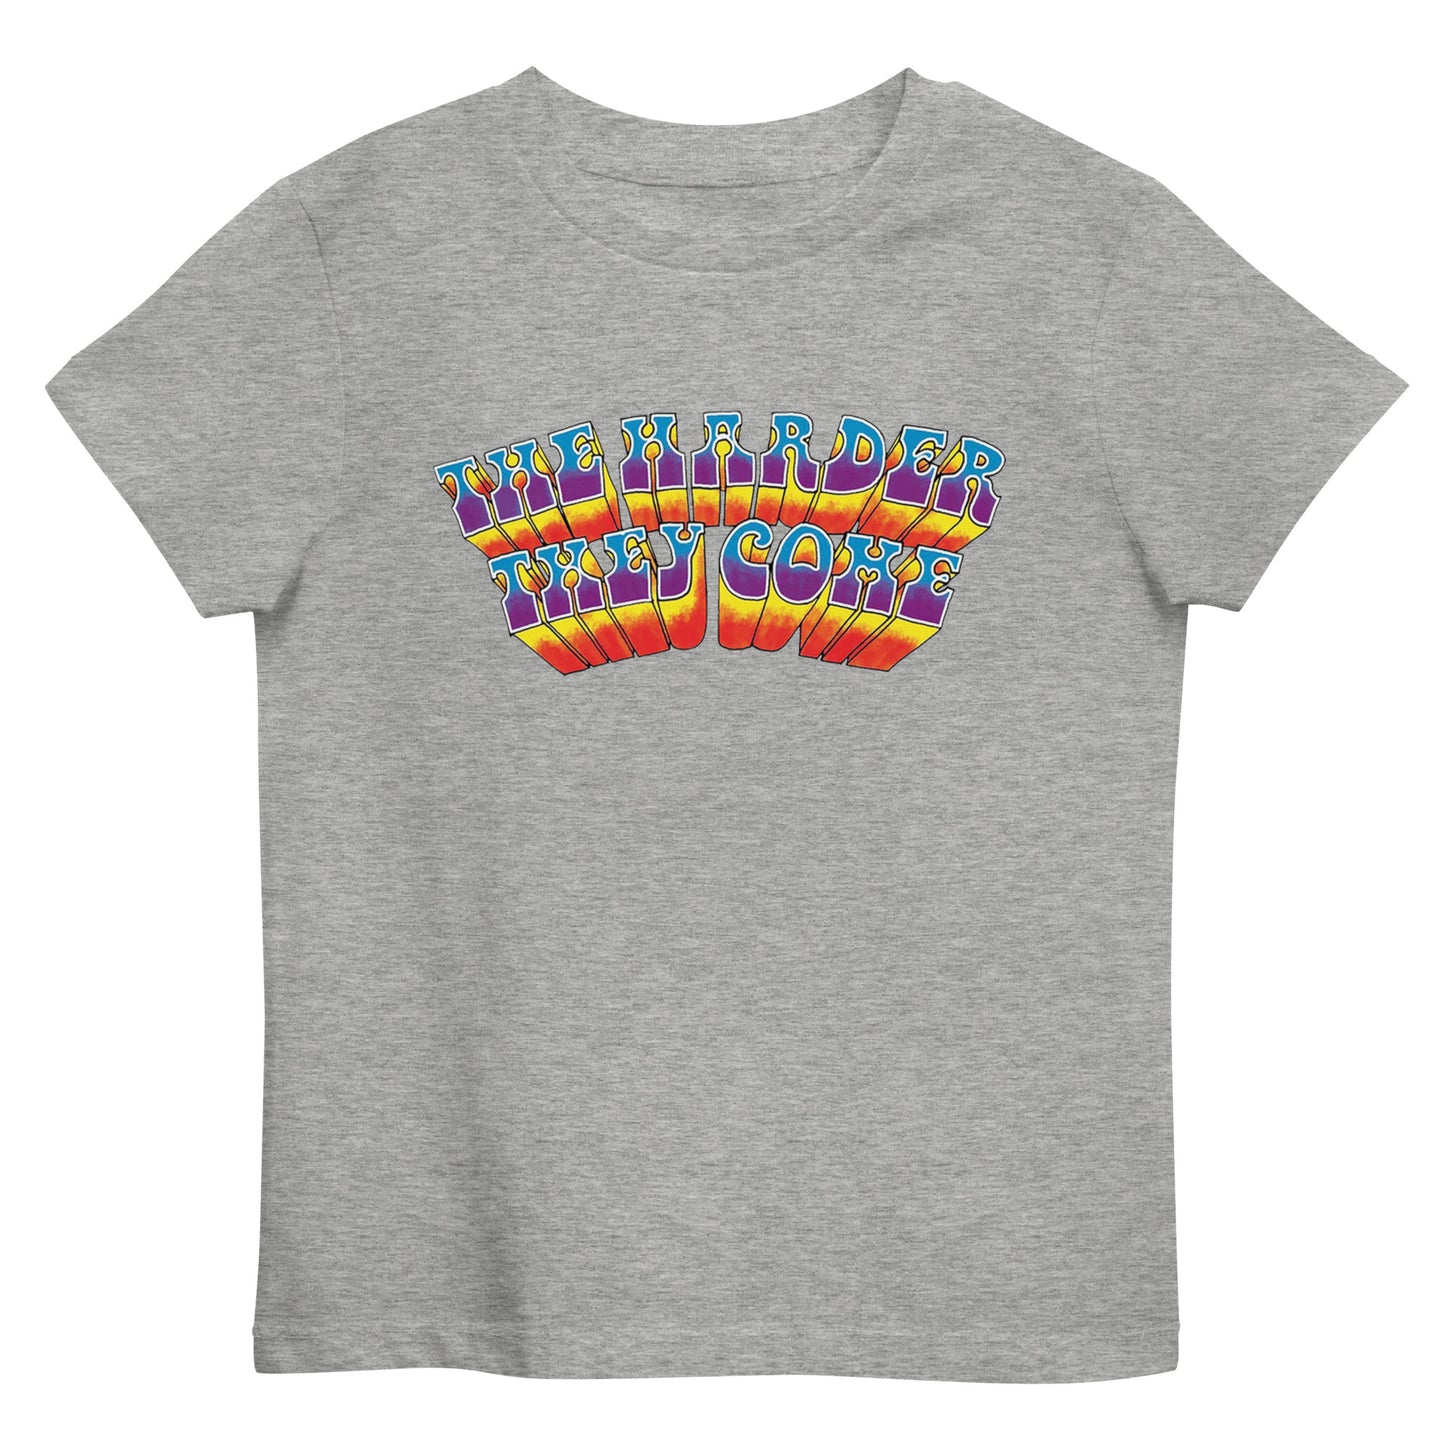 The Harder They Come 1972 Logo Organic Cotton Kids’ Unisex T-Shirt